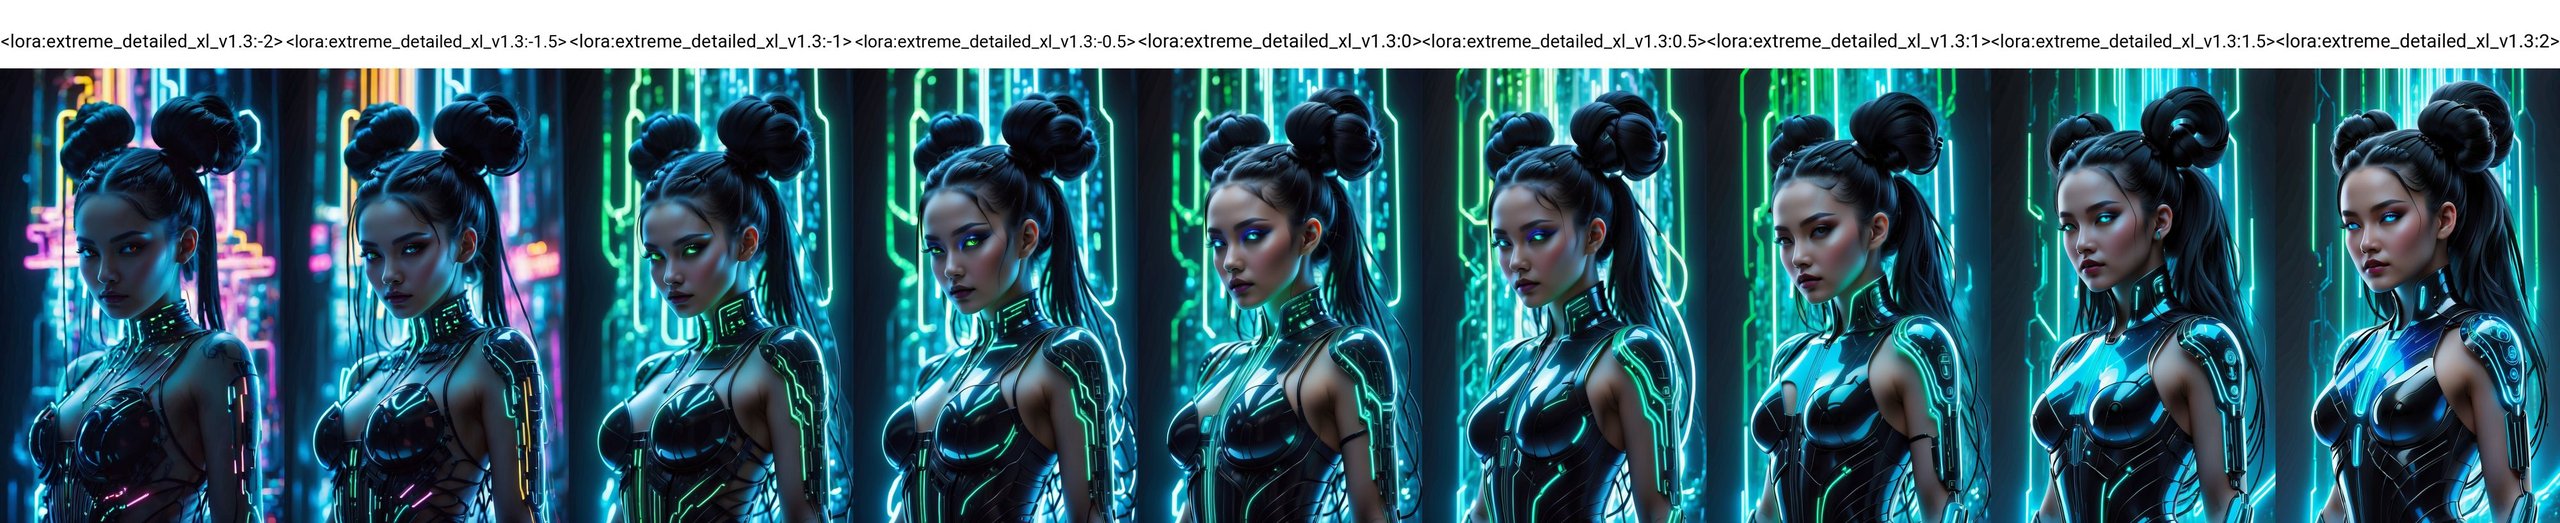 (best quality,8K,highres,masterpiece), ultra-detailed, (masterpiece, best quality, ultra-detailed:1.3), cyberpunk woman adorned with long black hair fashioned into space buns. In this ethereal scene, she embodies the role of the goddess of horticulture, surrounded by millions of microscopic, ultra-bright blue neon strings emanating from her form. composition showcases a stunningly beautiful backlit silhouette, intricately detailed and adorned with neon clouds, creating a mesmerizing and vivid blue color palette <lora:extreme_detailed_xl_v1.3:-2>